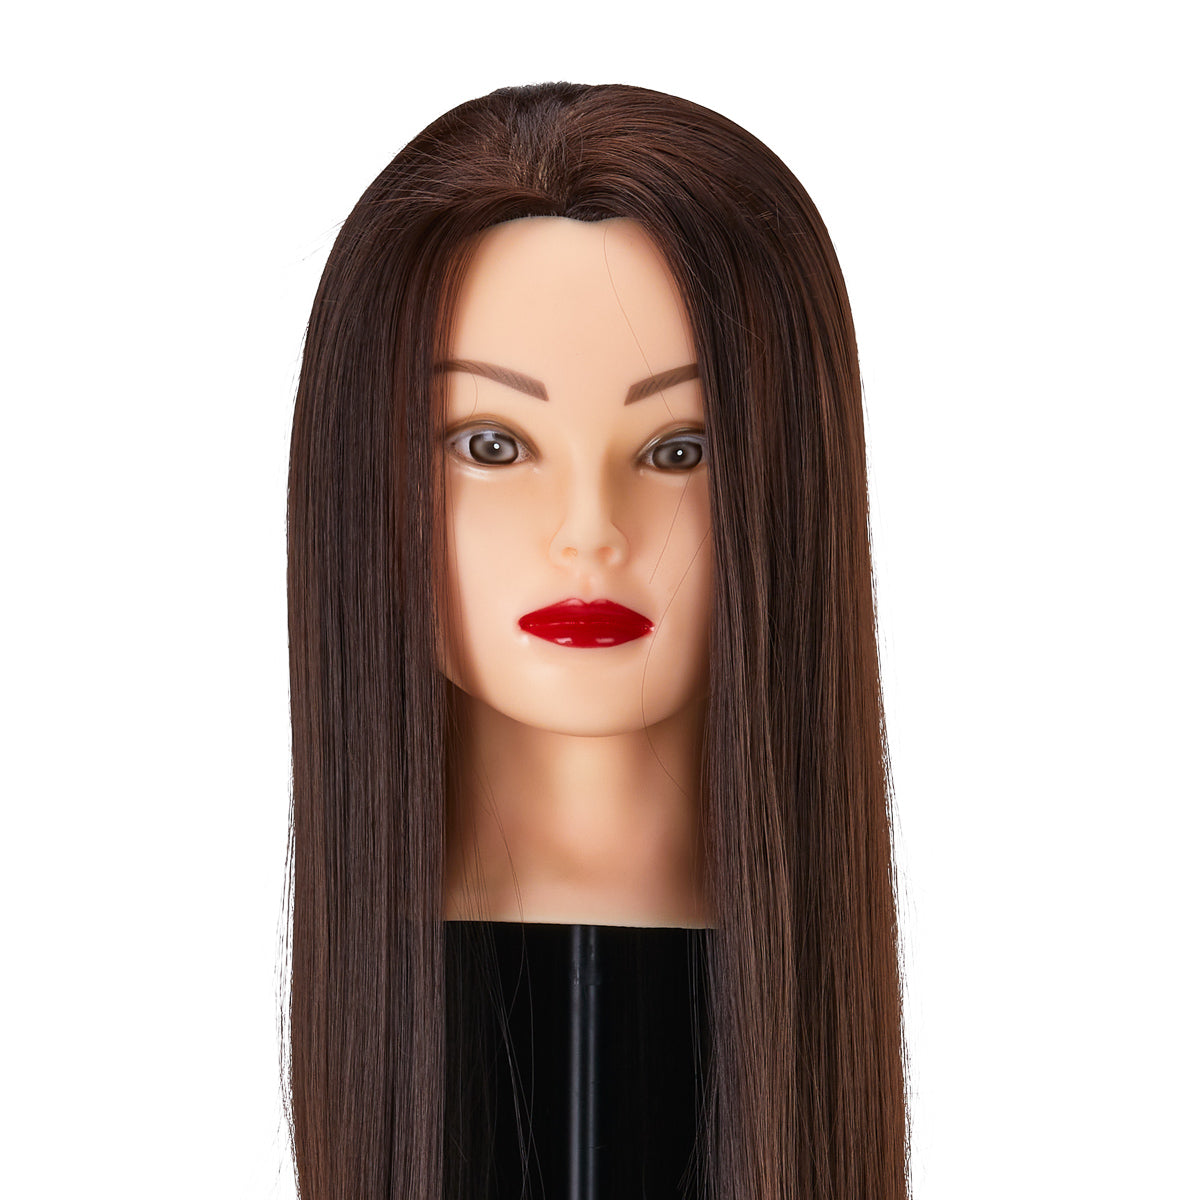 Gabbiano WZ2 Hairdressing Training Head with Synthetic Hair, Color 4#, Length 24" 